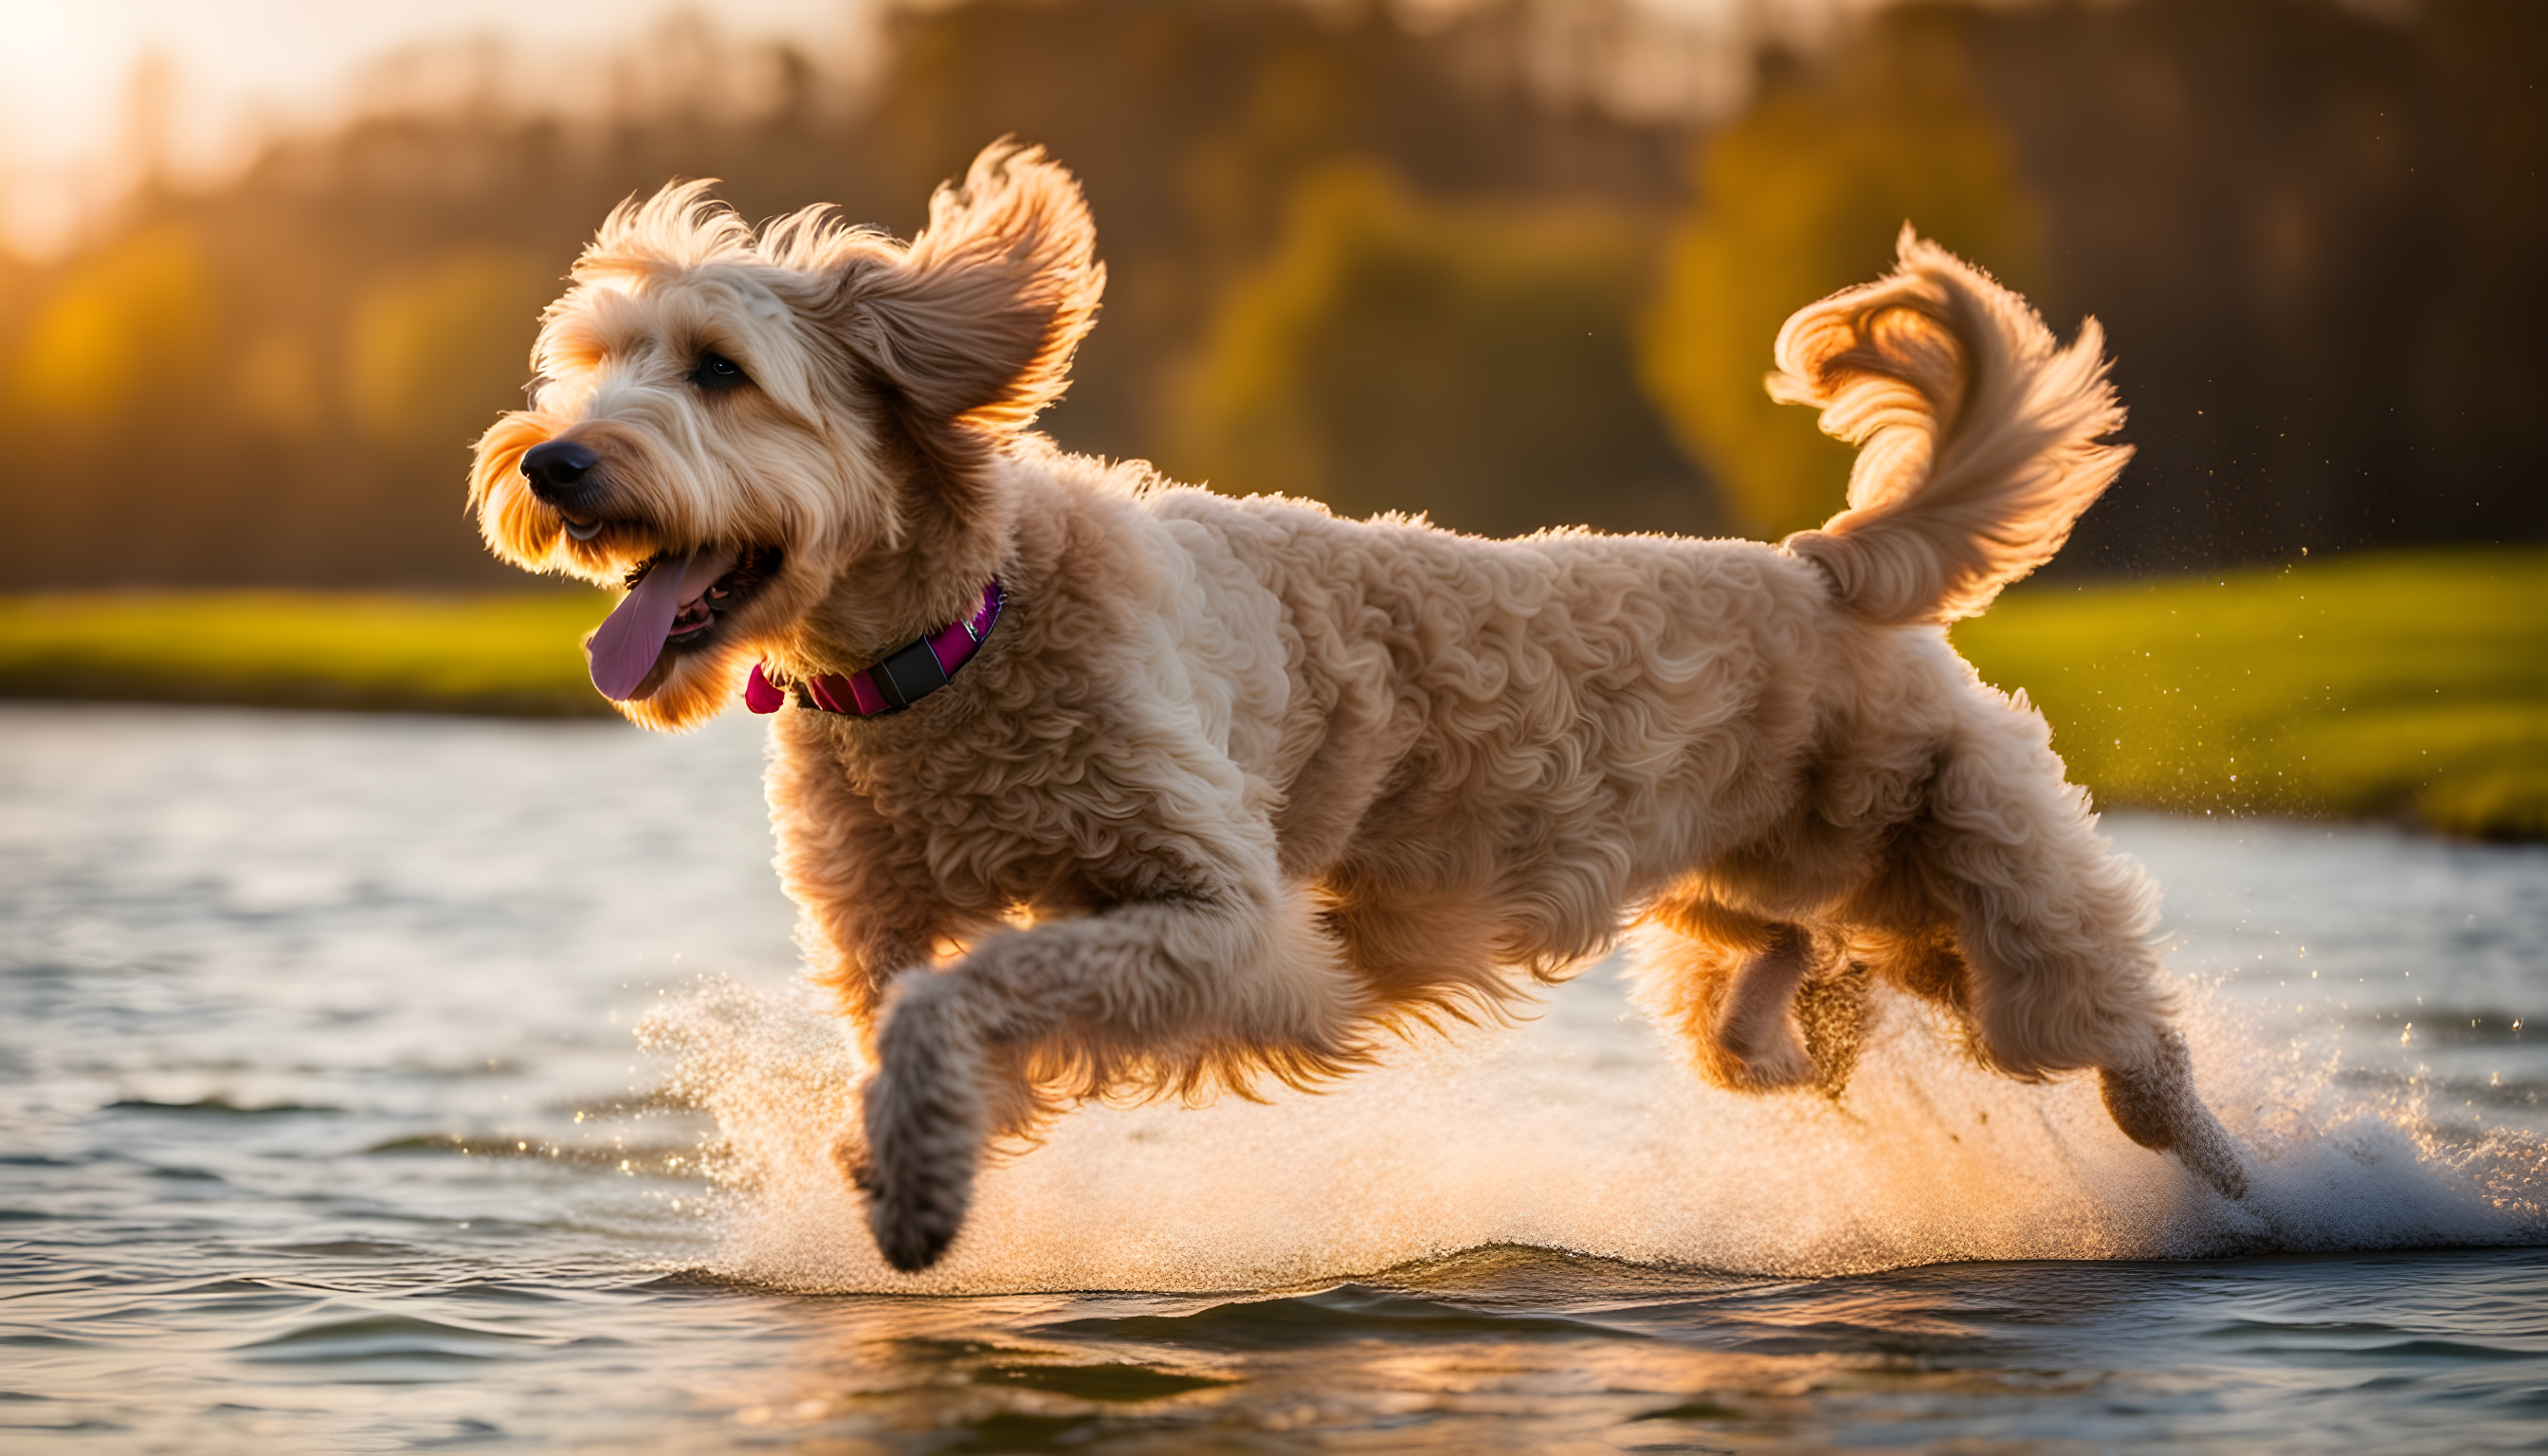 A Labradoodle captured in mid-jump, fetching a frisbee, embodying pure joy and boundless energy.